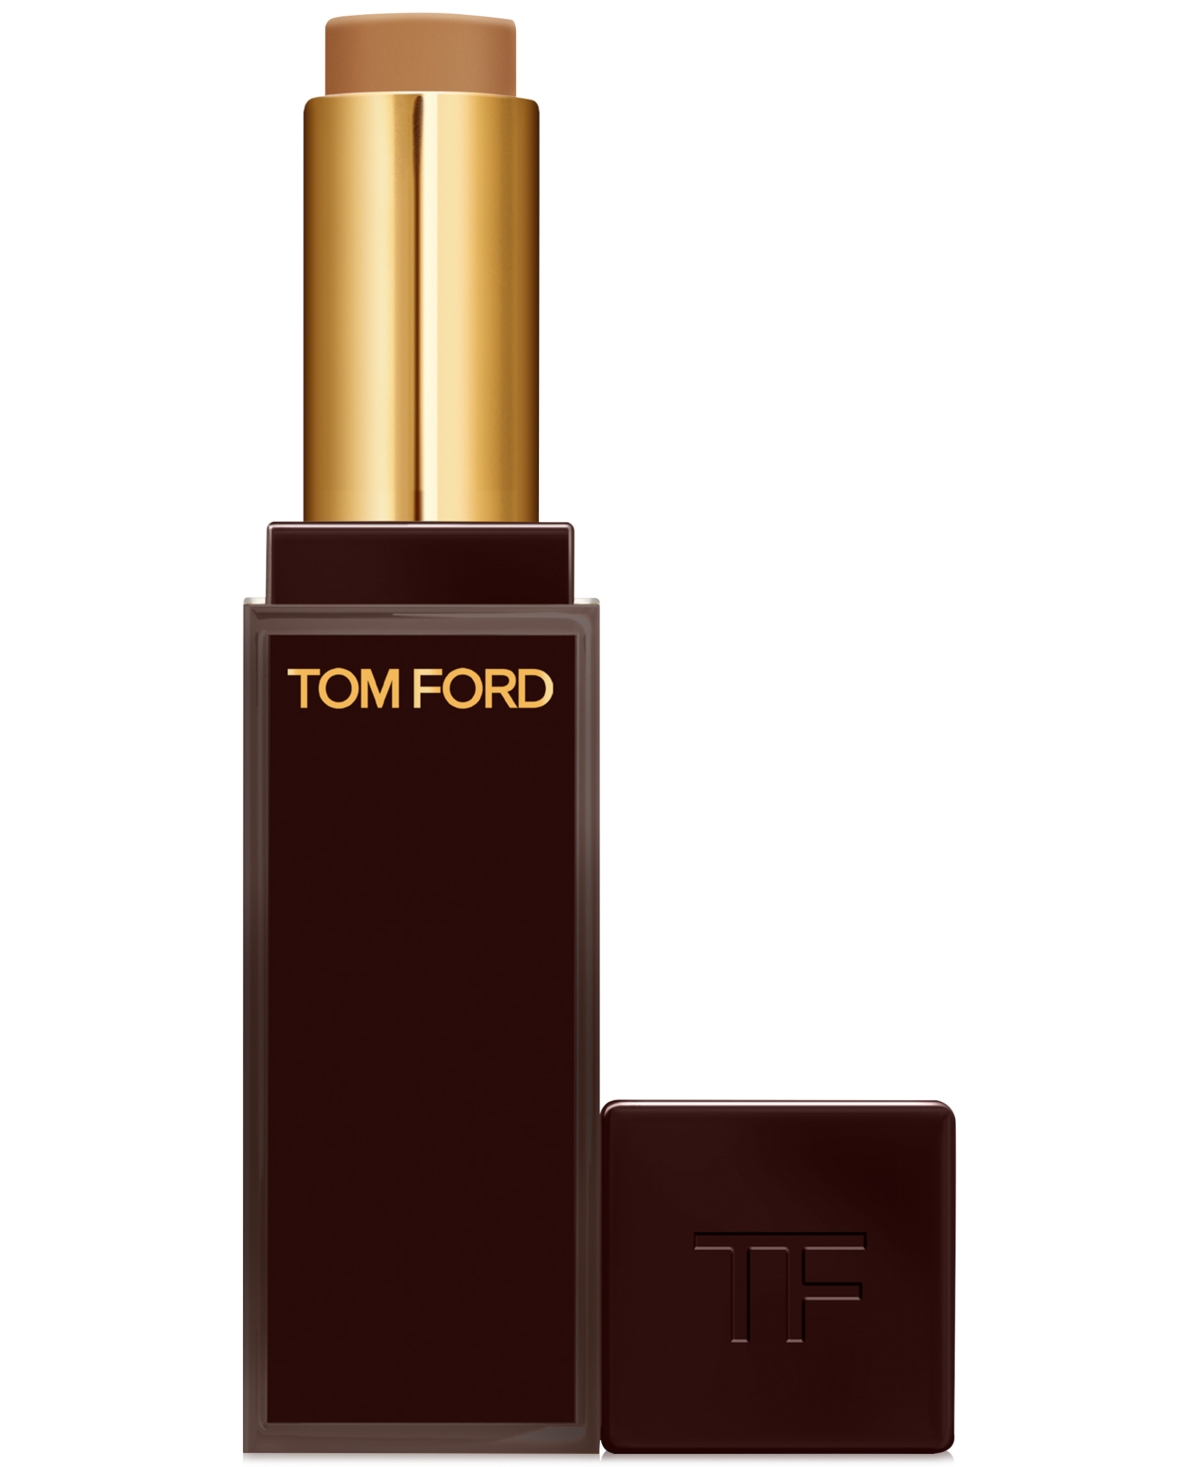 Tom Ford Traceless Soft Matte Concealer In W Spice (tan-deep Skin With Red Underton